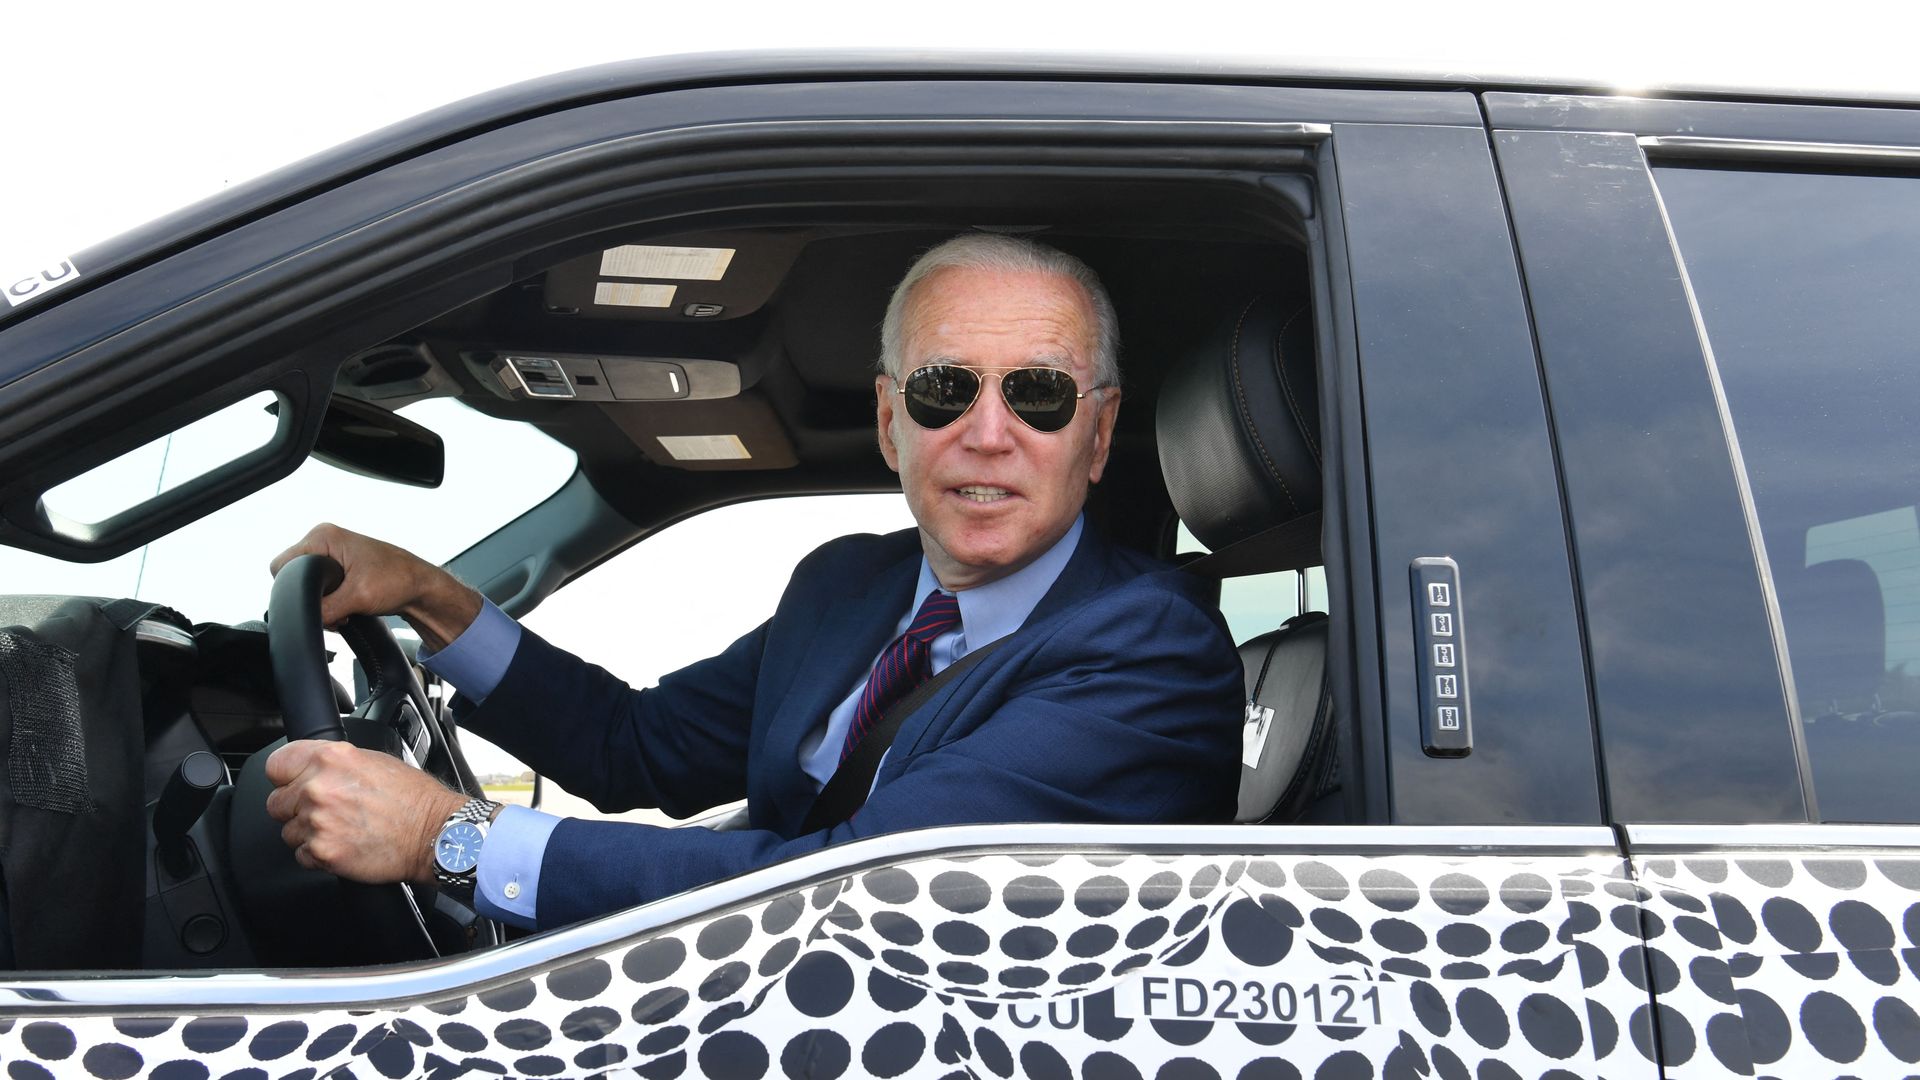 President Biden is seen driving an electric F-150 pickup truck during a visit to a Ford plant in Michigan.